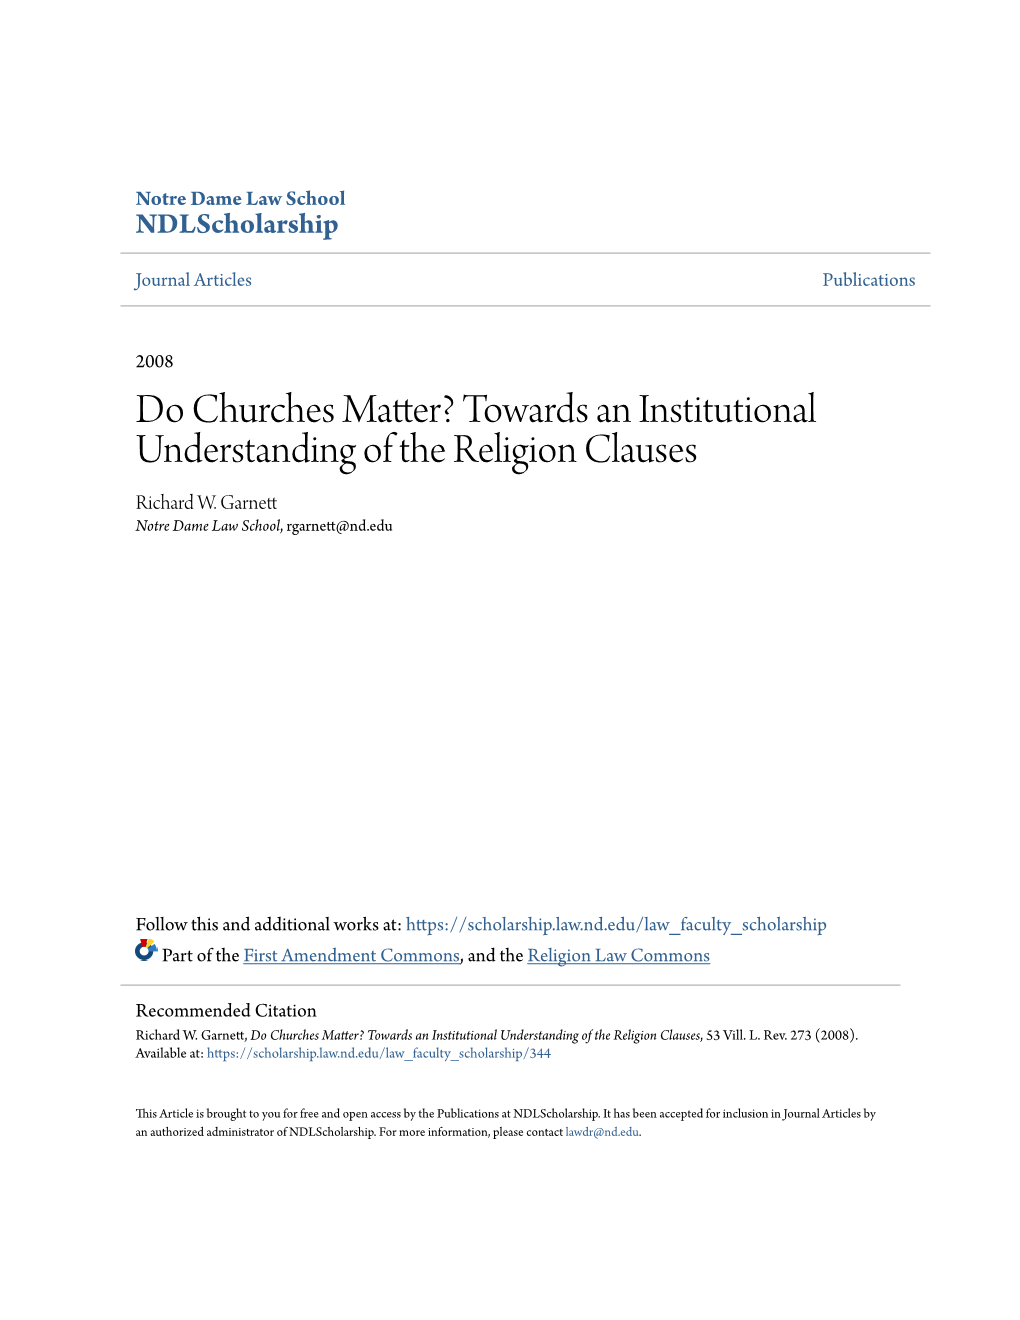 Do Churches Matter? Towards an Institutional Understanding of the Religion Clauses Richard W